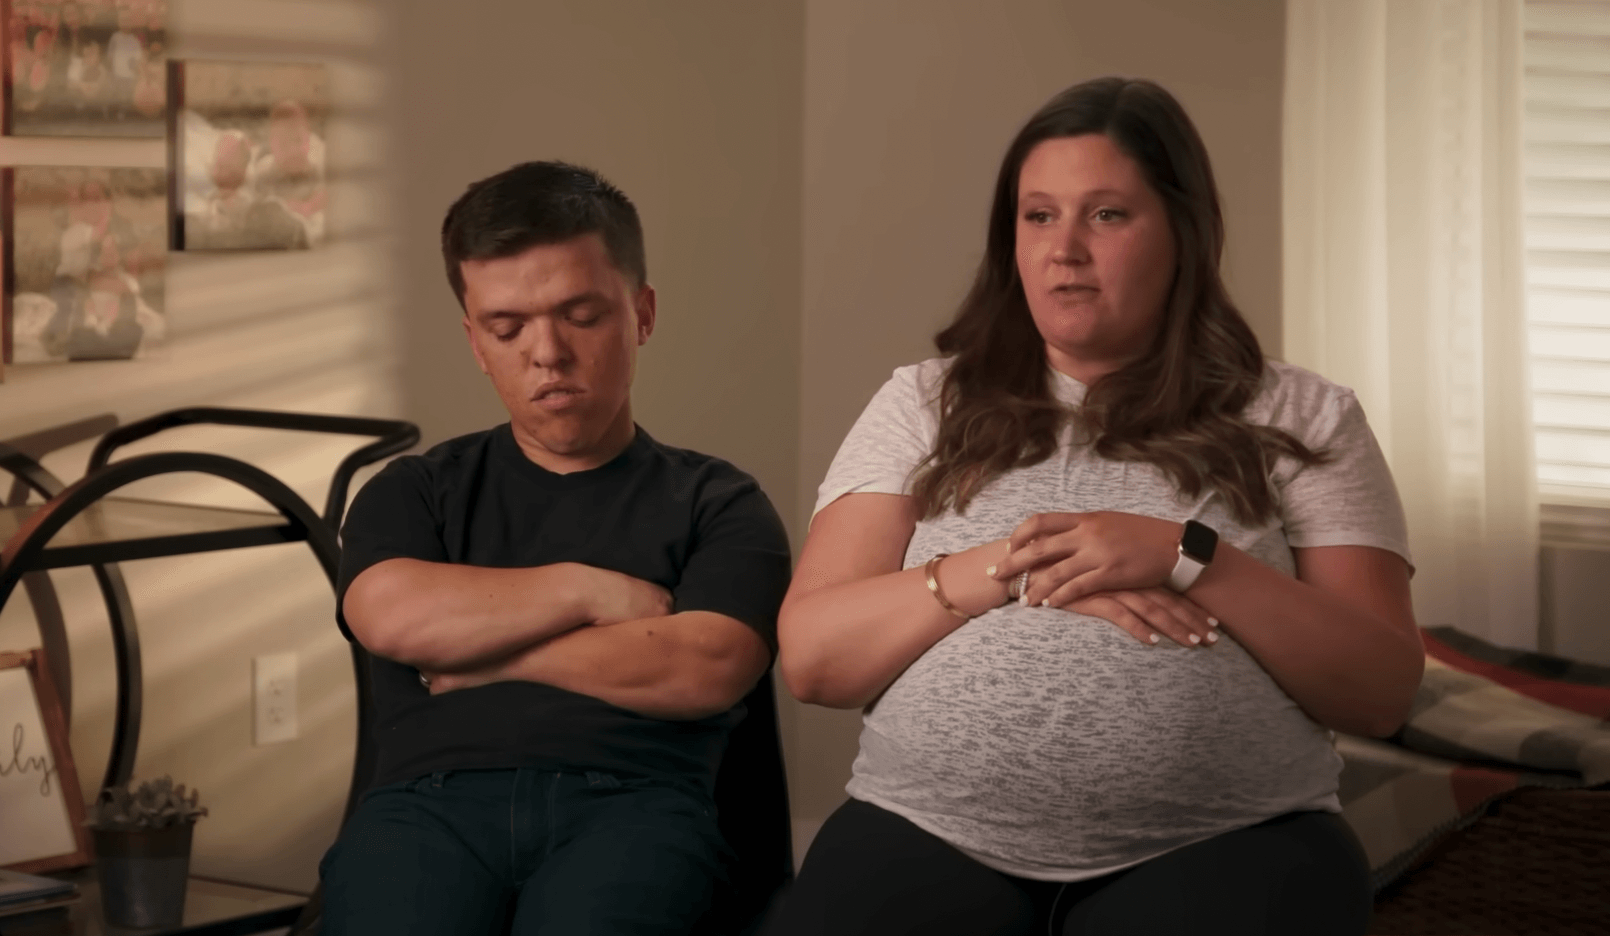 Zach and Tori Roloff from 'Little People, Big World' sitting next to each other